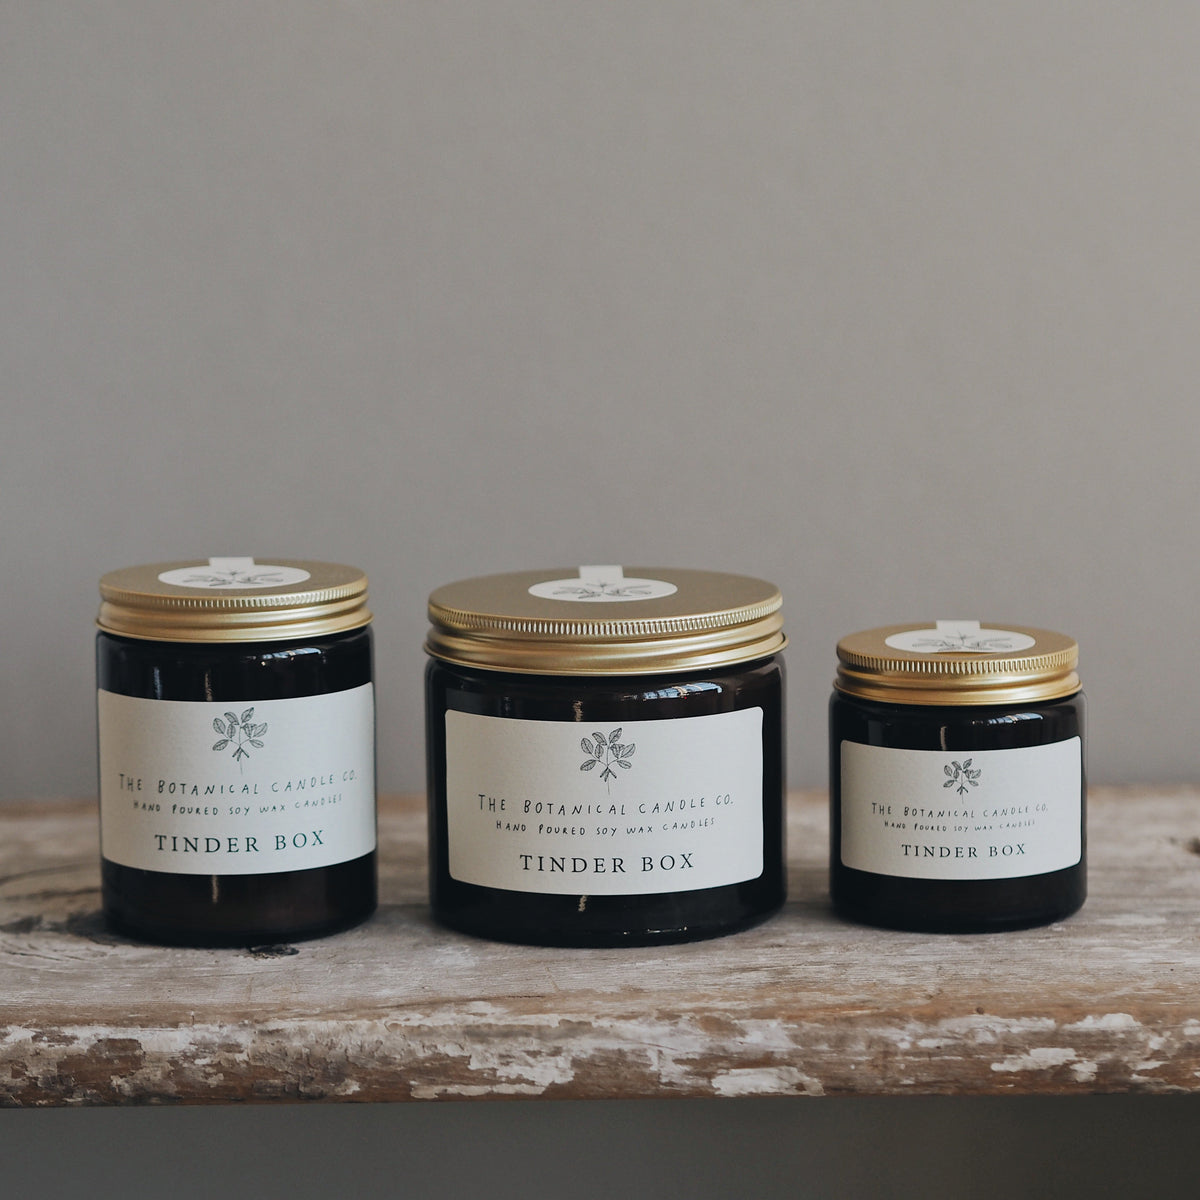 Tinder Box Soy Candles in Amber Jars – The Botanical Candle Co.